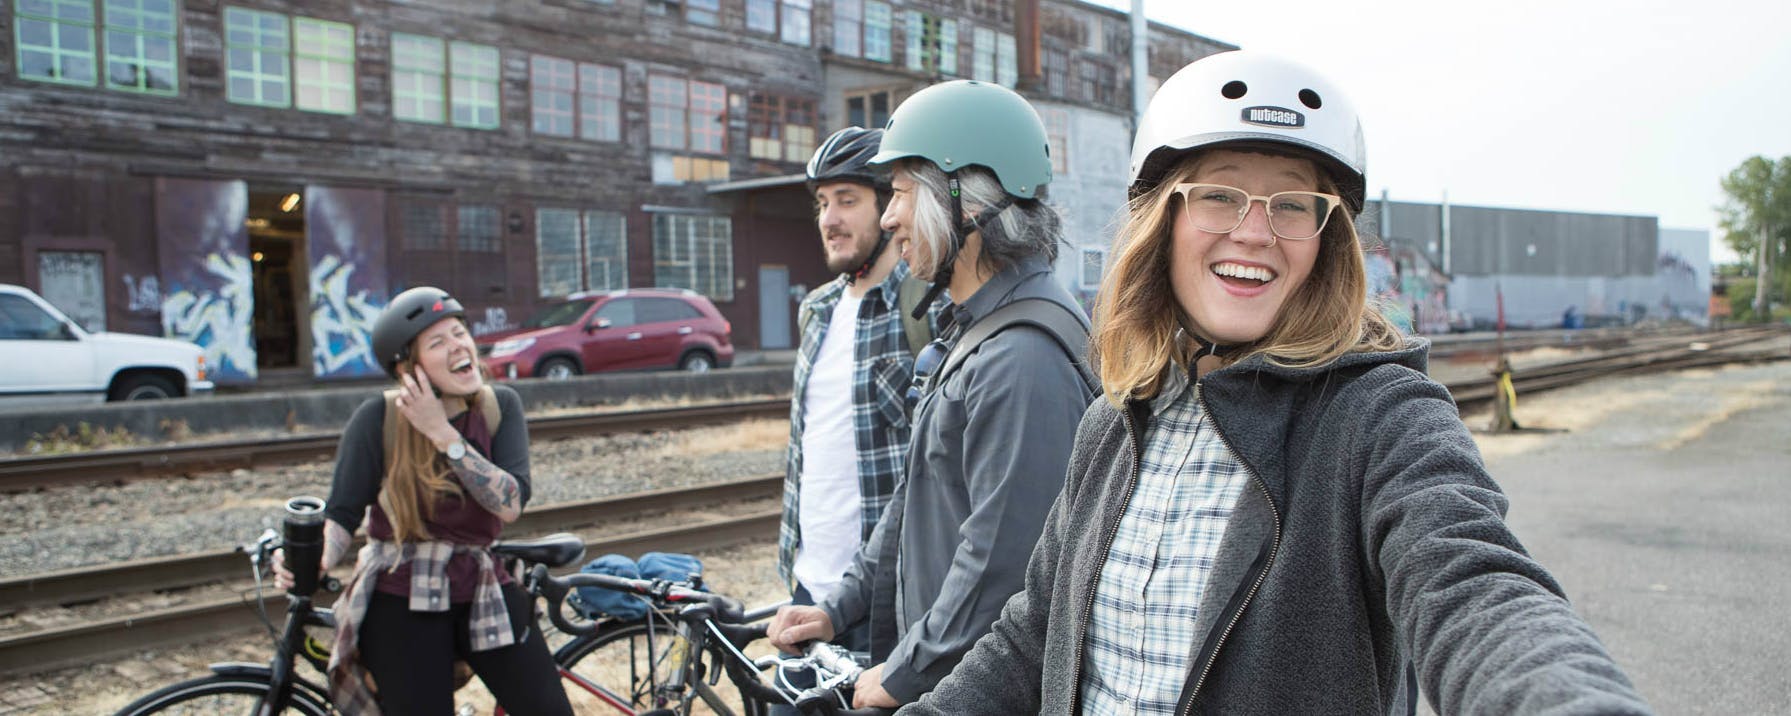 City cycling culture: Canadian cities great for urban riding